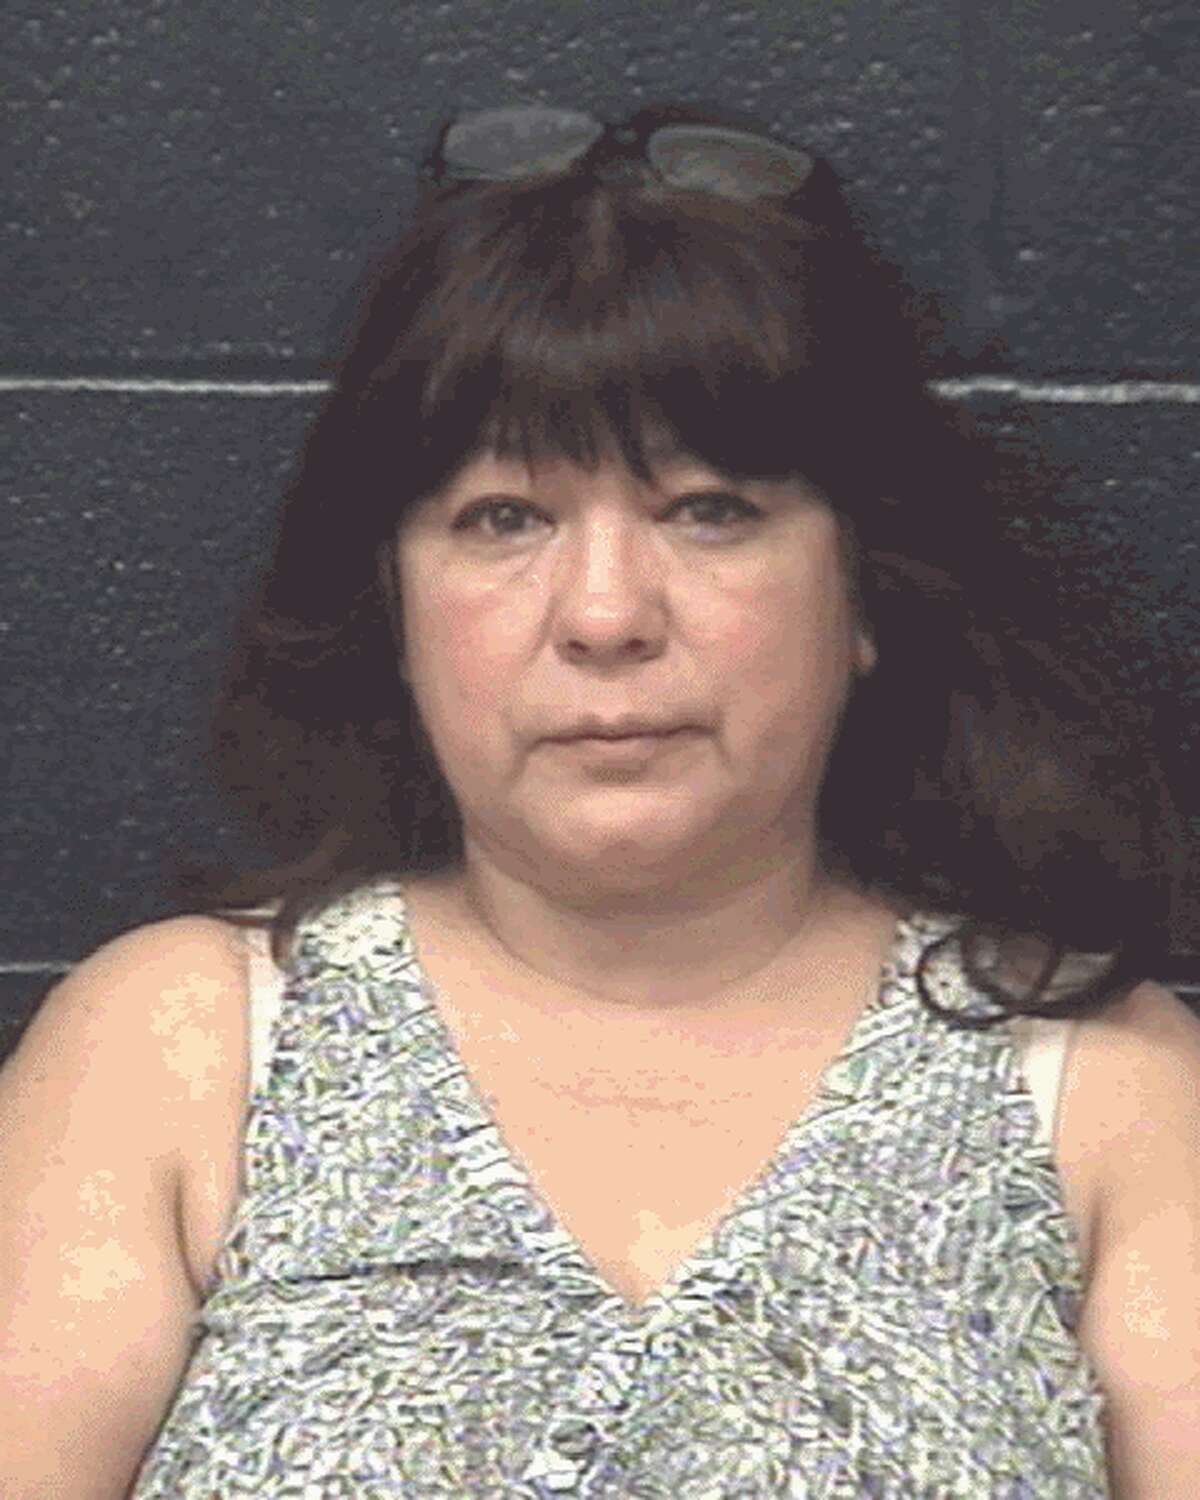 CAVAZOS, NORMA (W F) (52) years of age was arrested on the charge of THEFT PROP>=$100